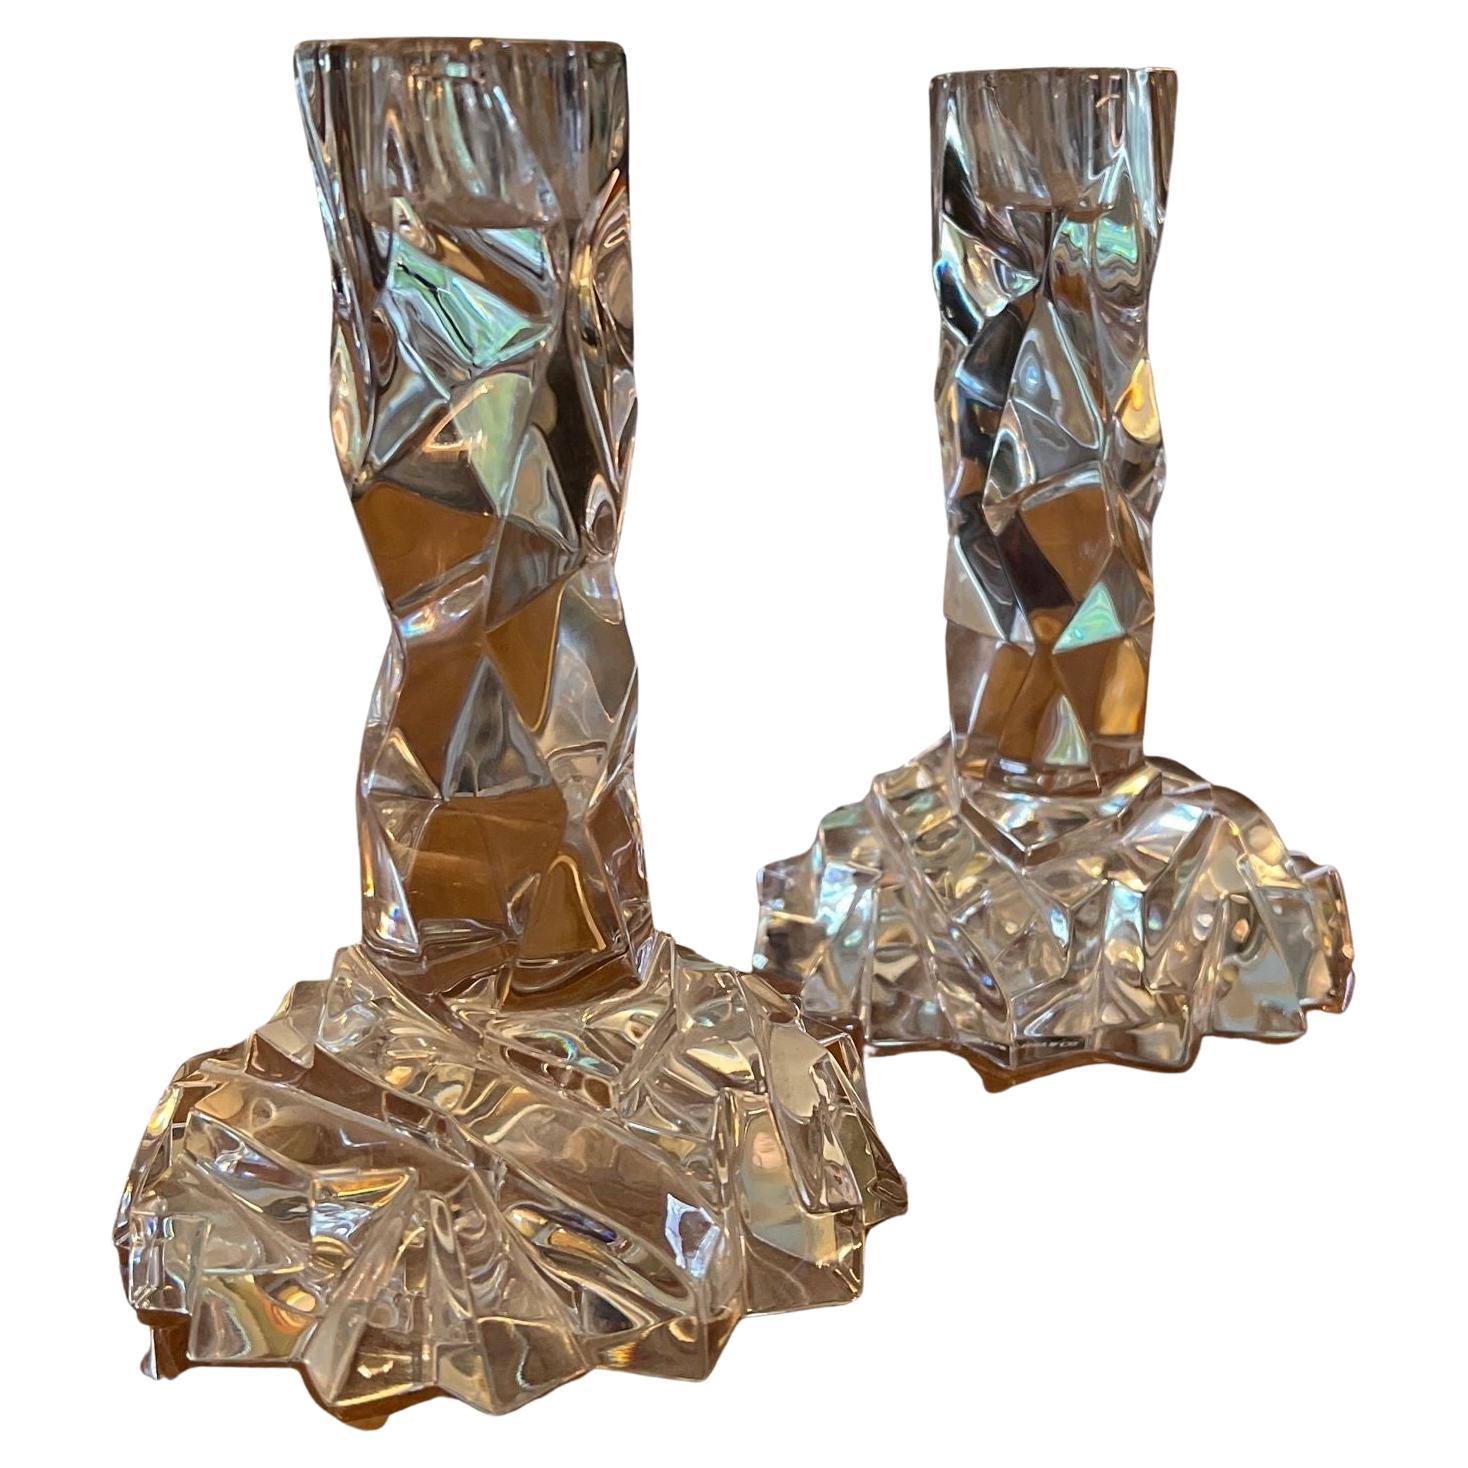 Pair of Tiffany Glass Candlesticks